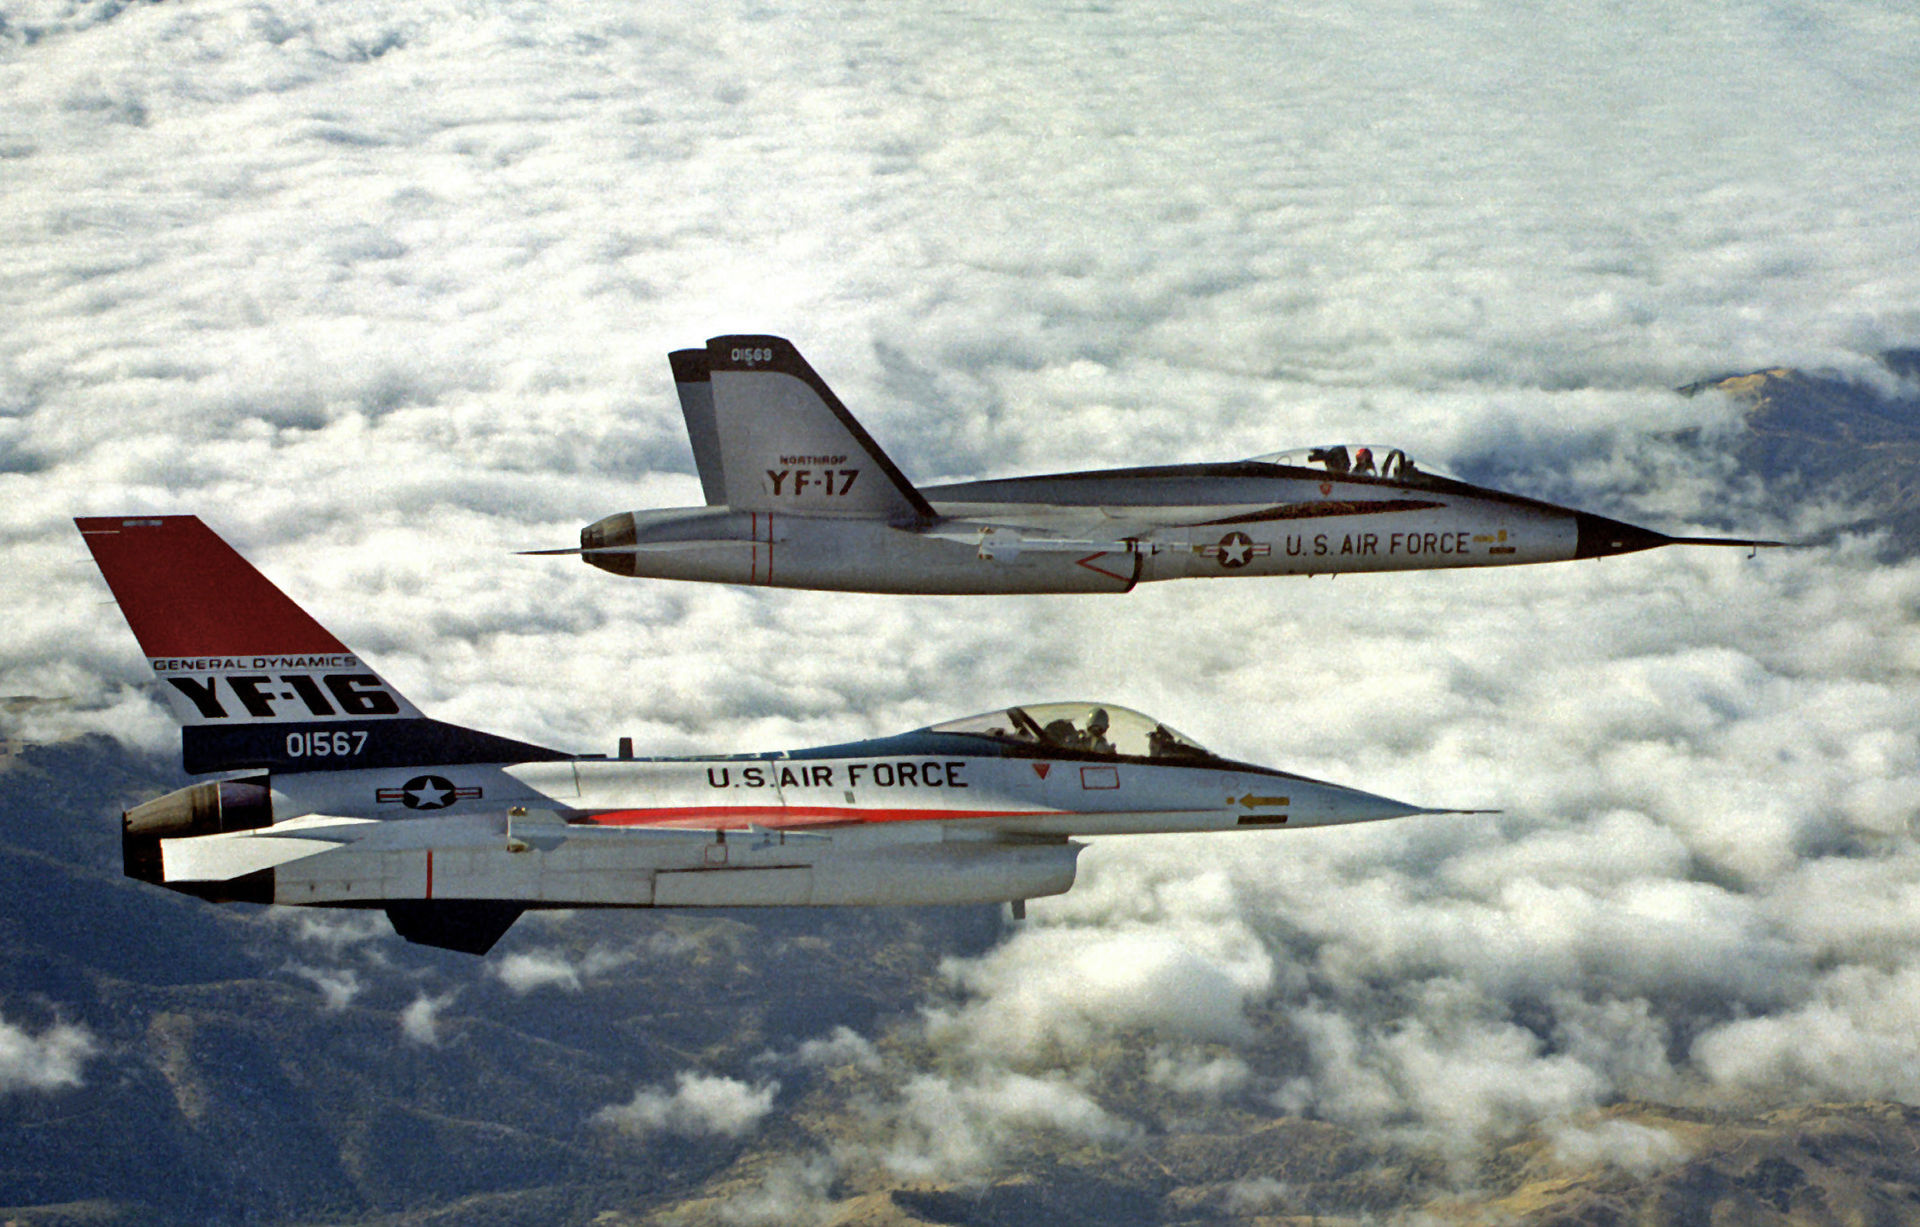 The F-16 and F-17 together in flight.